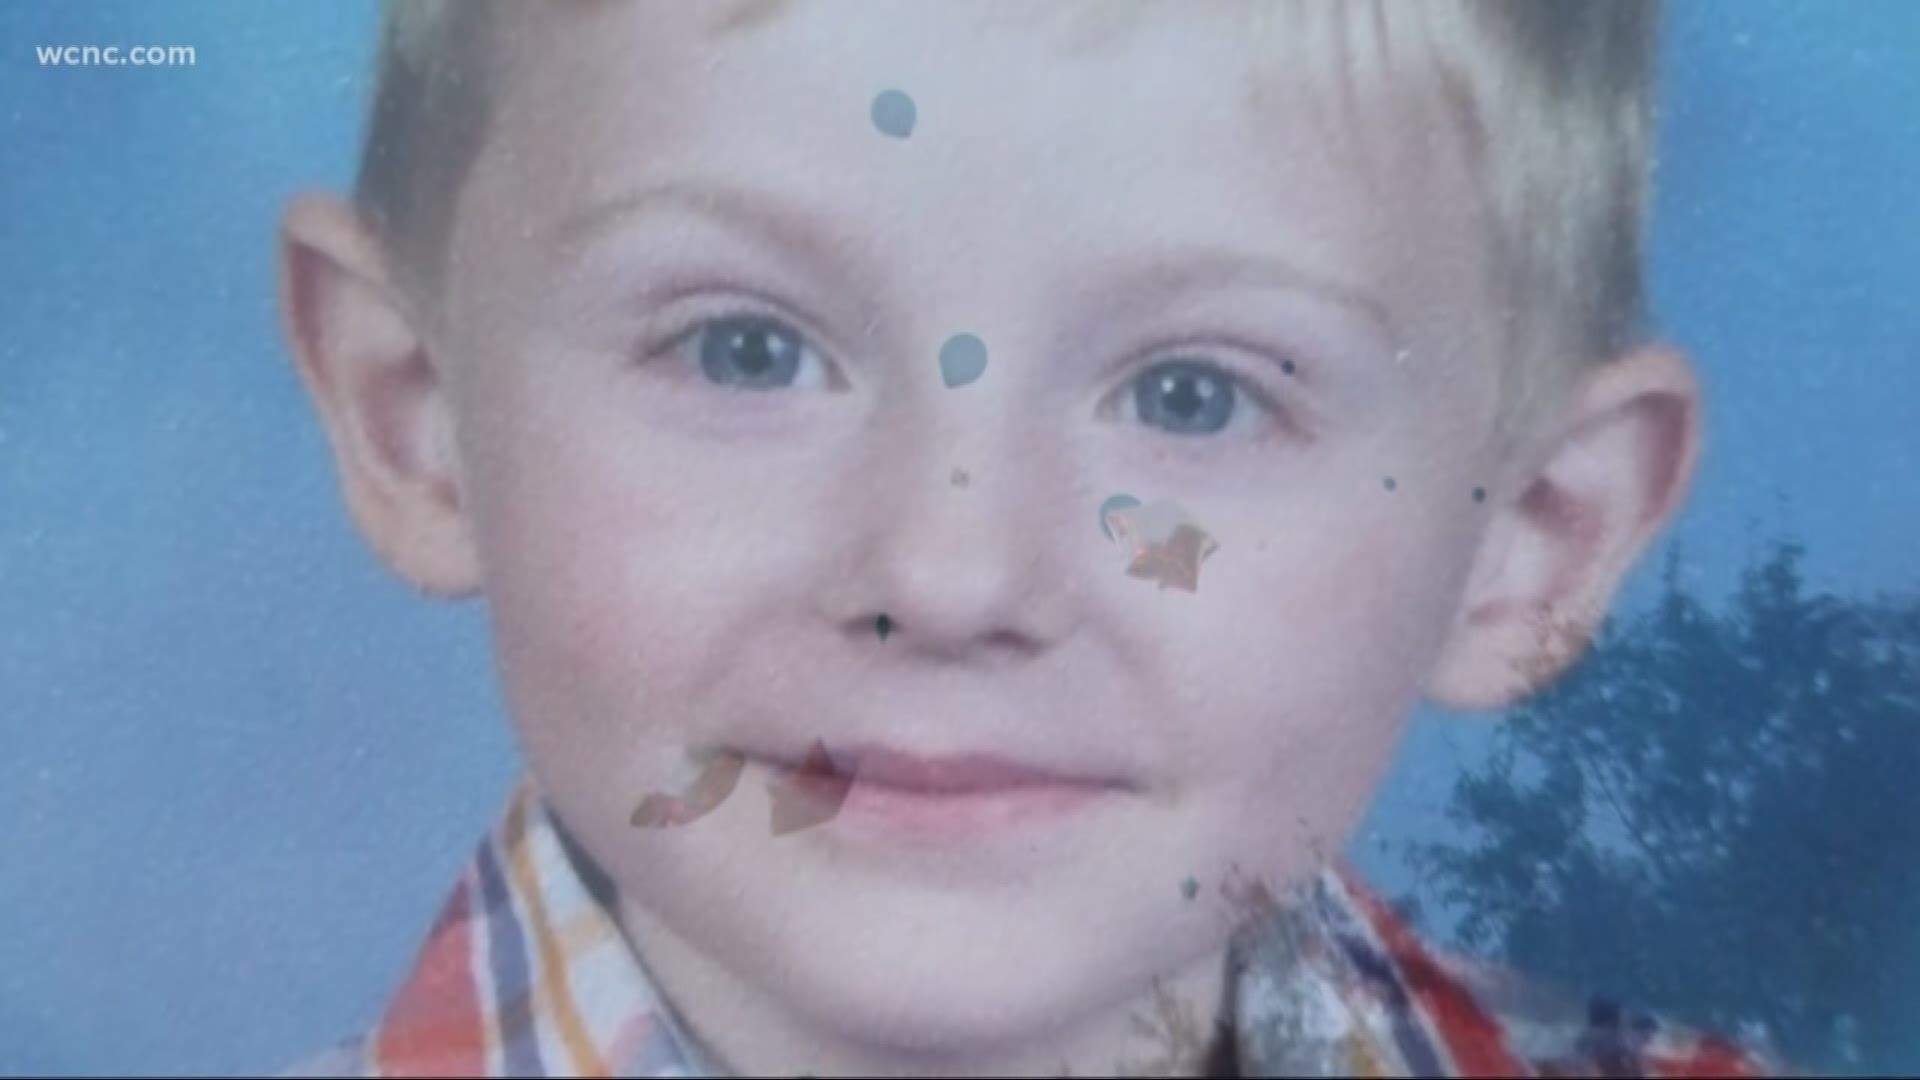 Police in Gastonia confirmed that the body found in a creek last week was that of missing six-year-old Maddox Ritch.